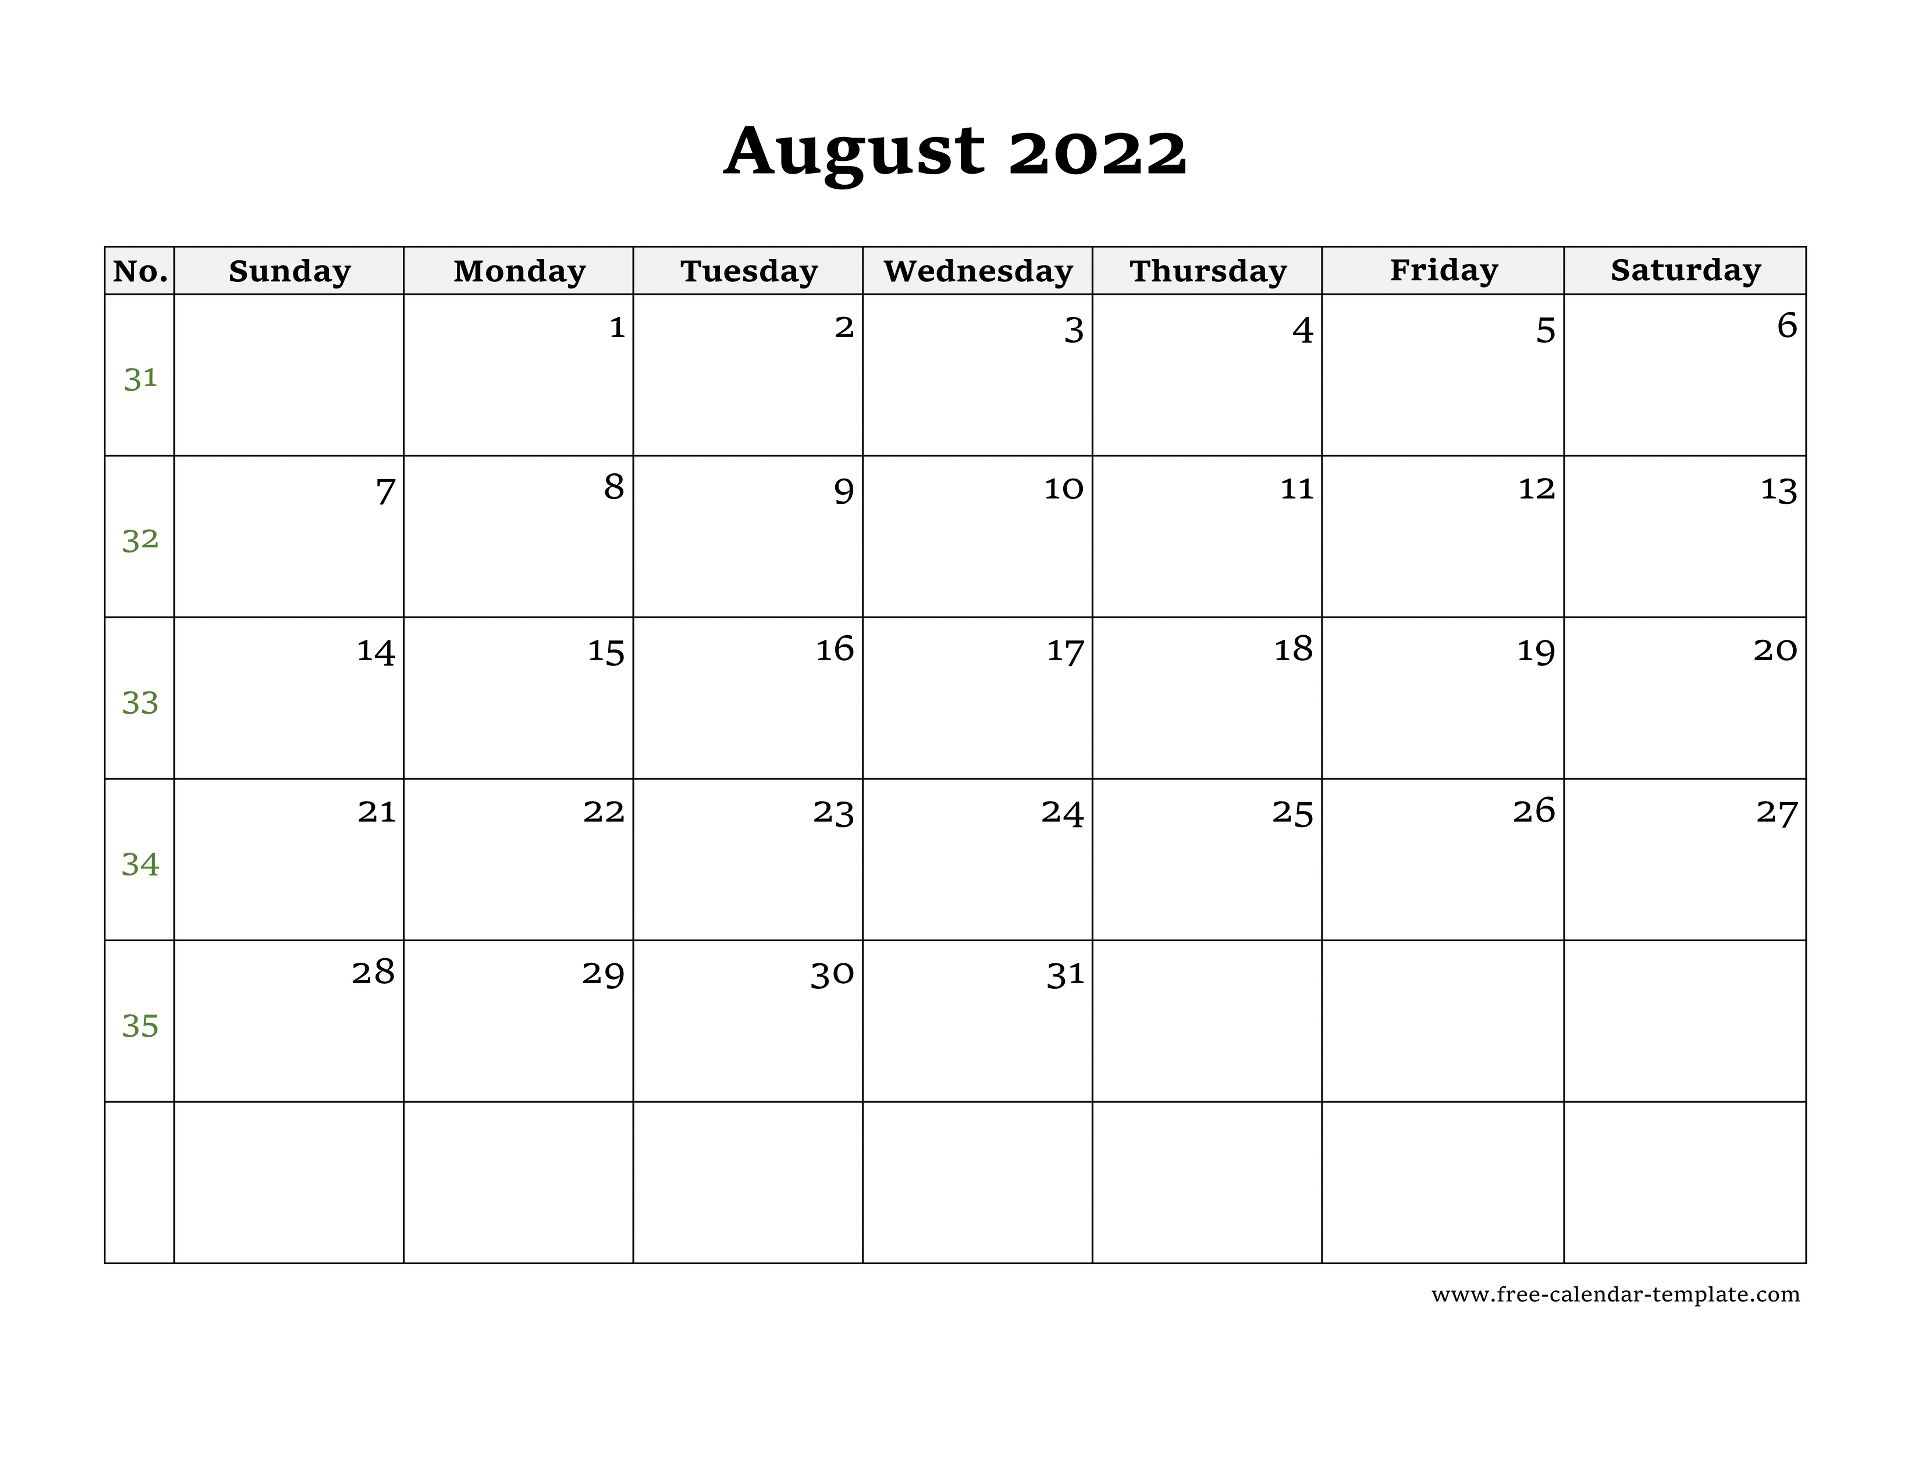 Simple August Calendar 2022 Large Box On Each Day For Notes. | Free within Printable August 2022 Calendar